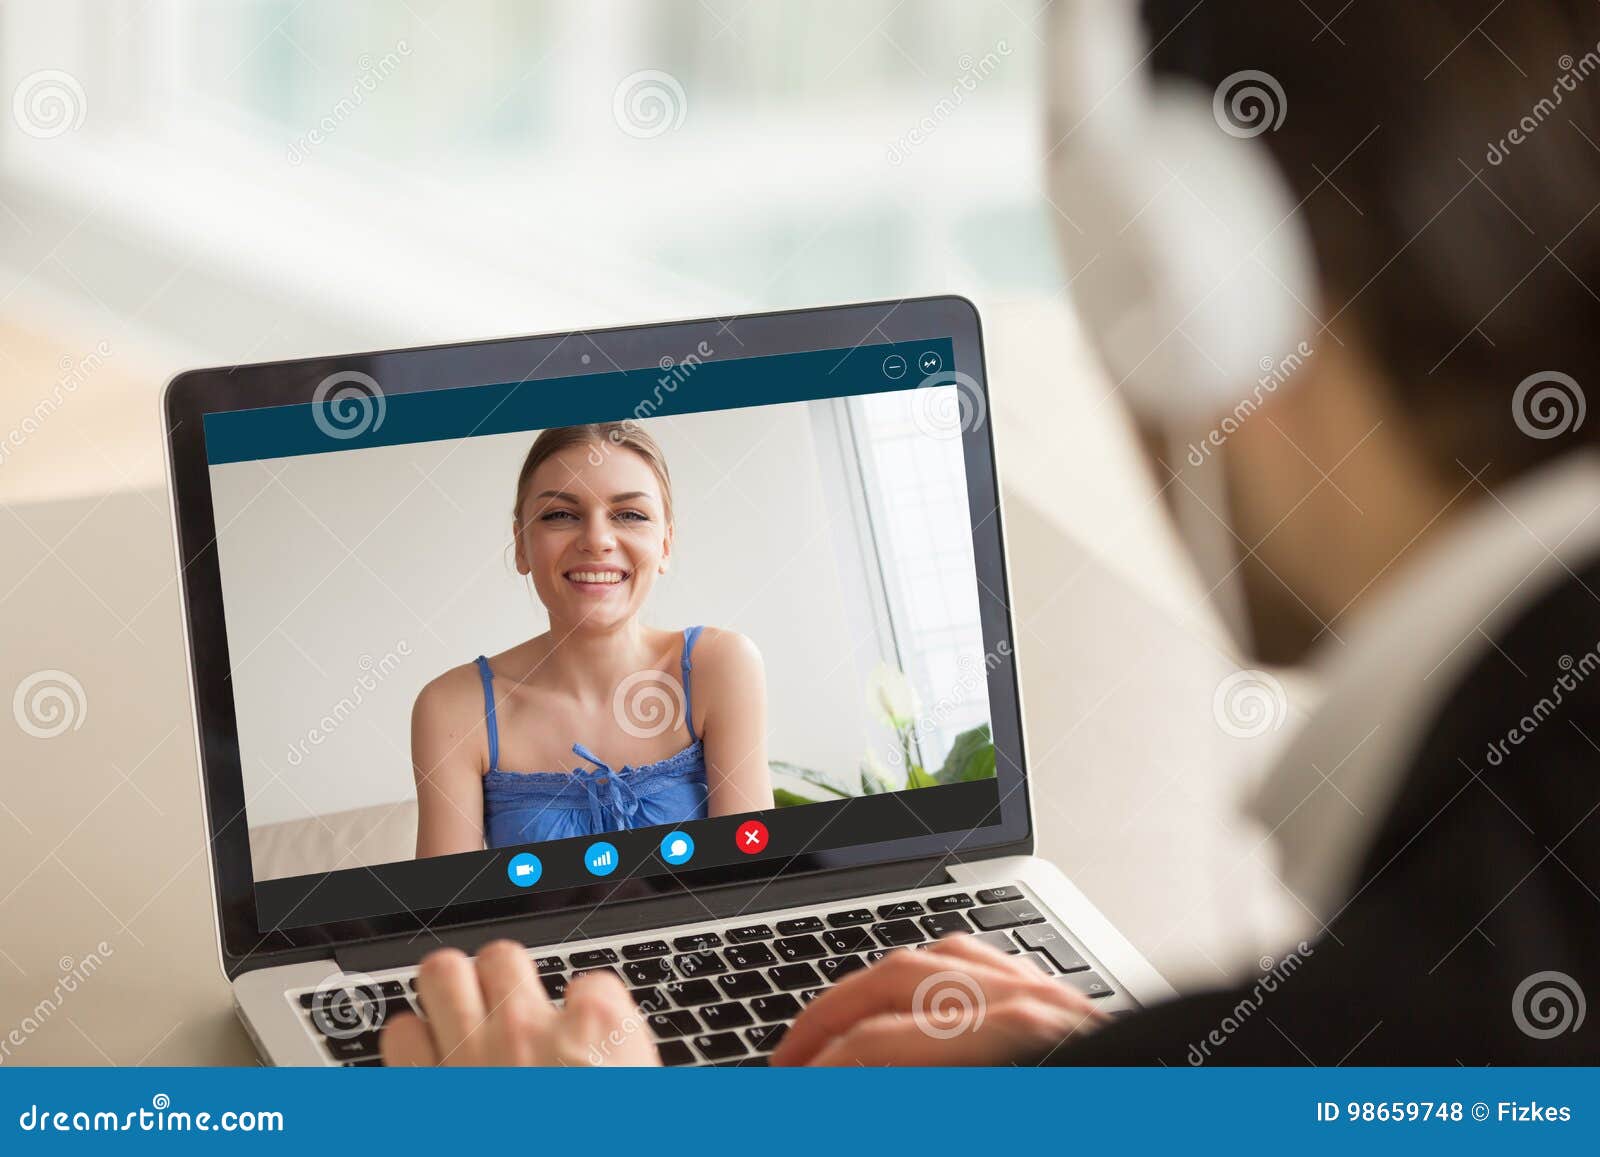 Shemale video chat